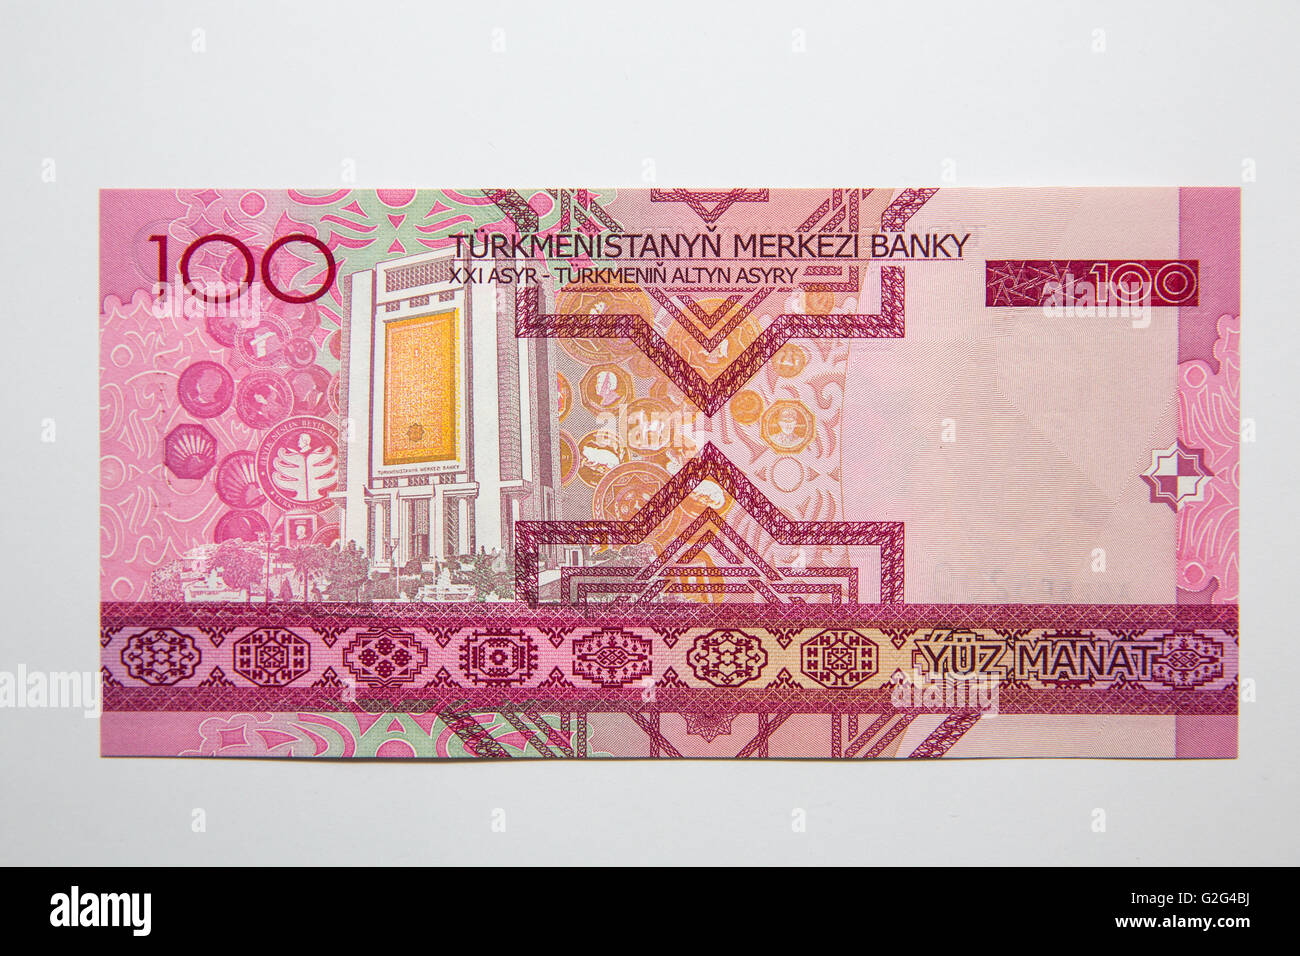 The back of the Turkmenistan 100 note Stock Photo